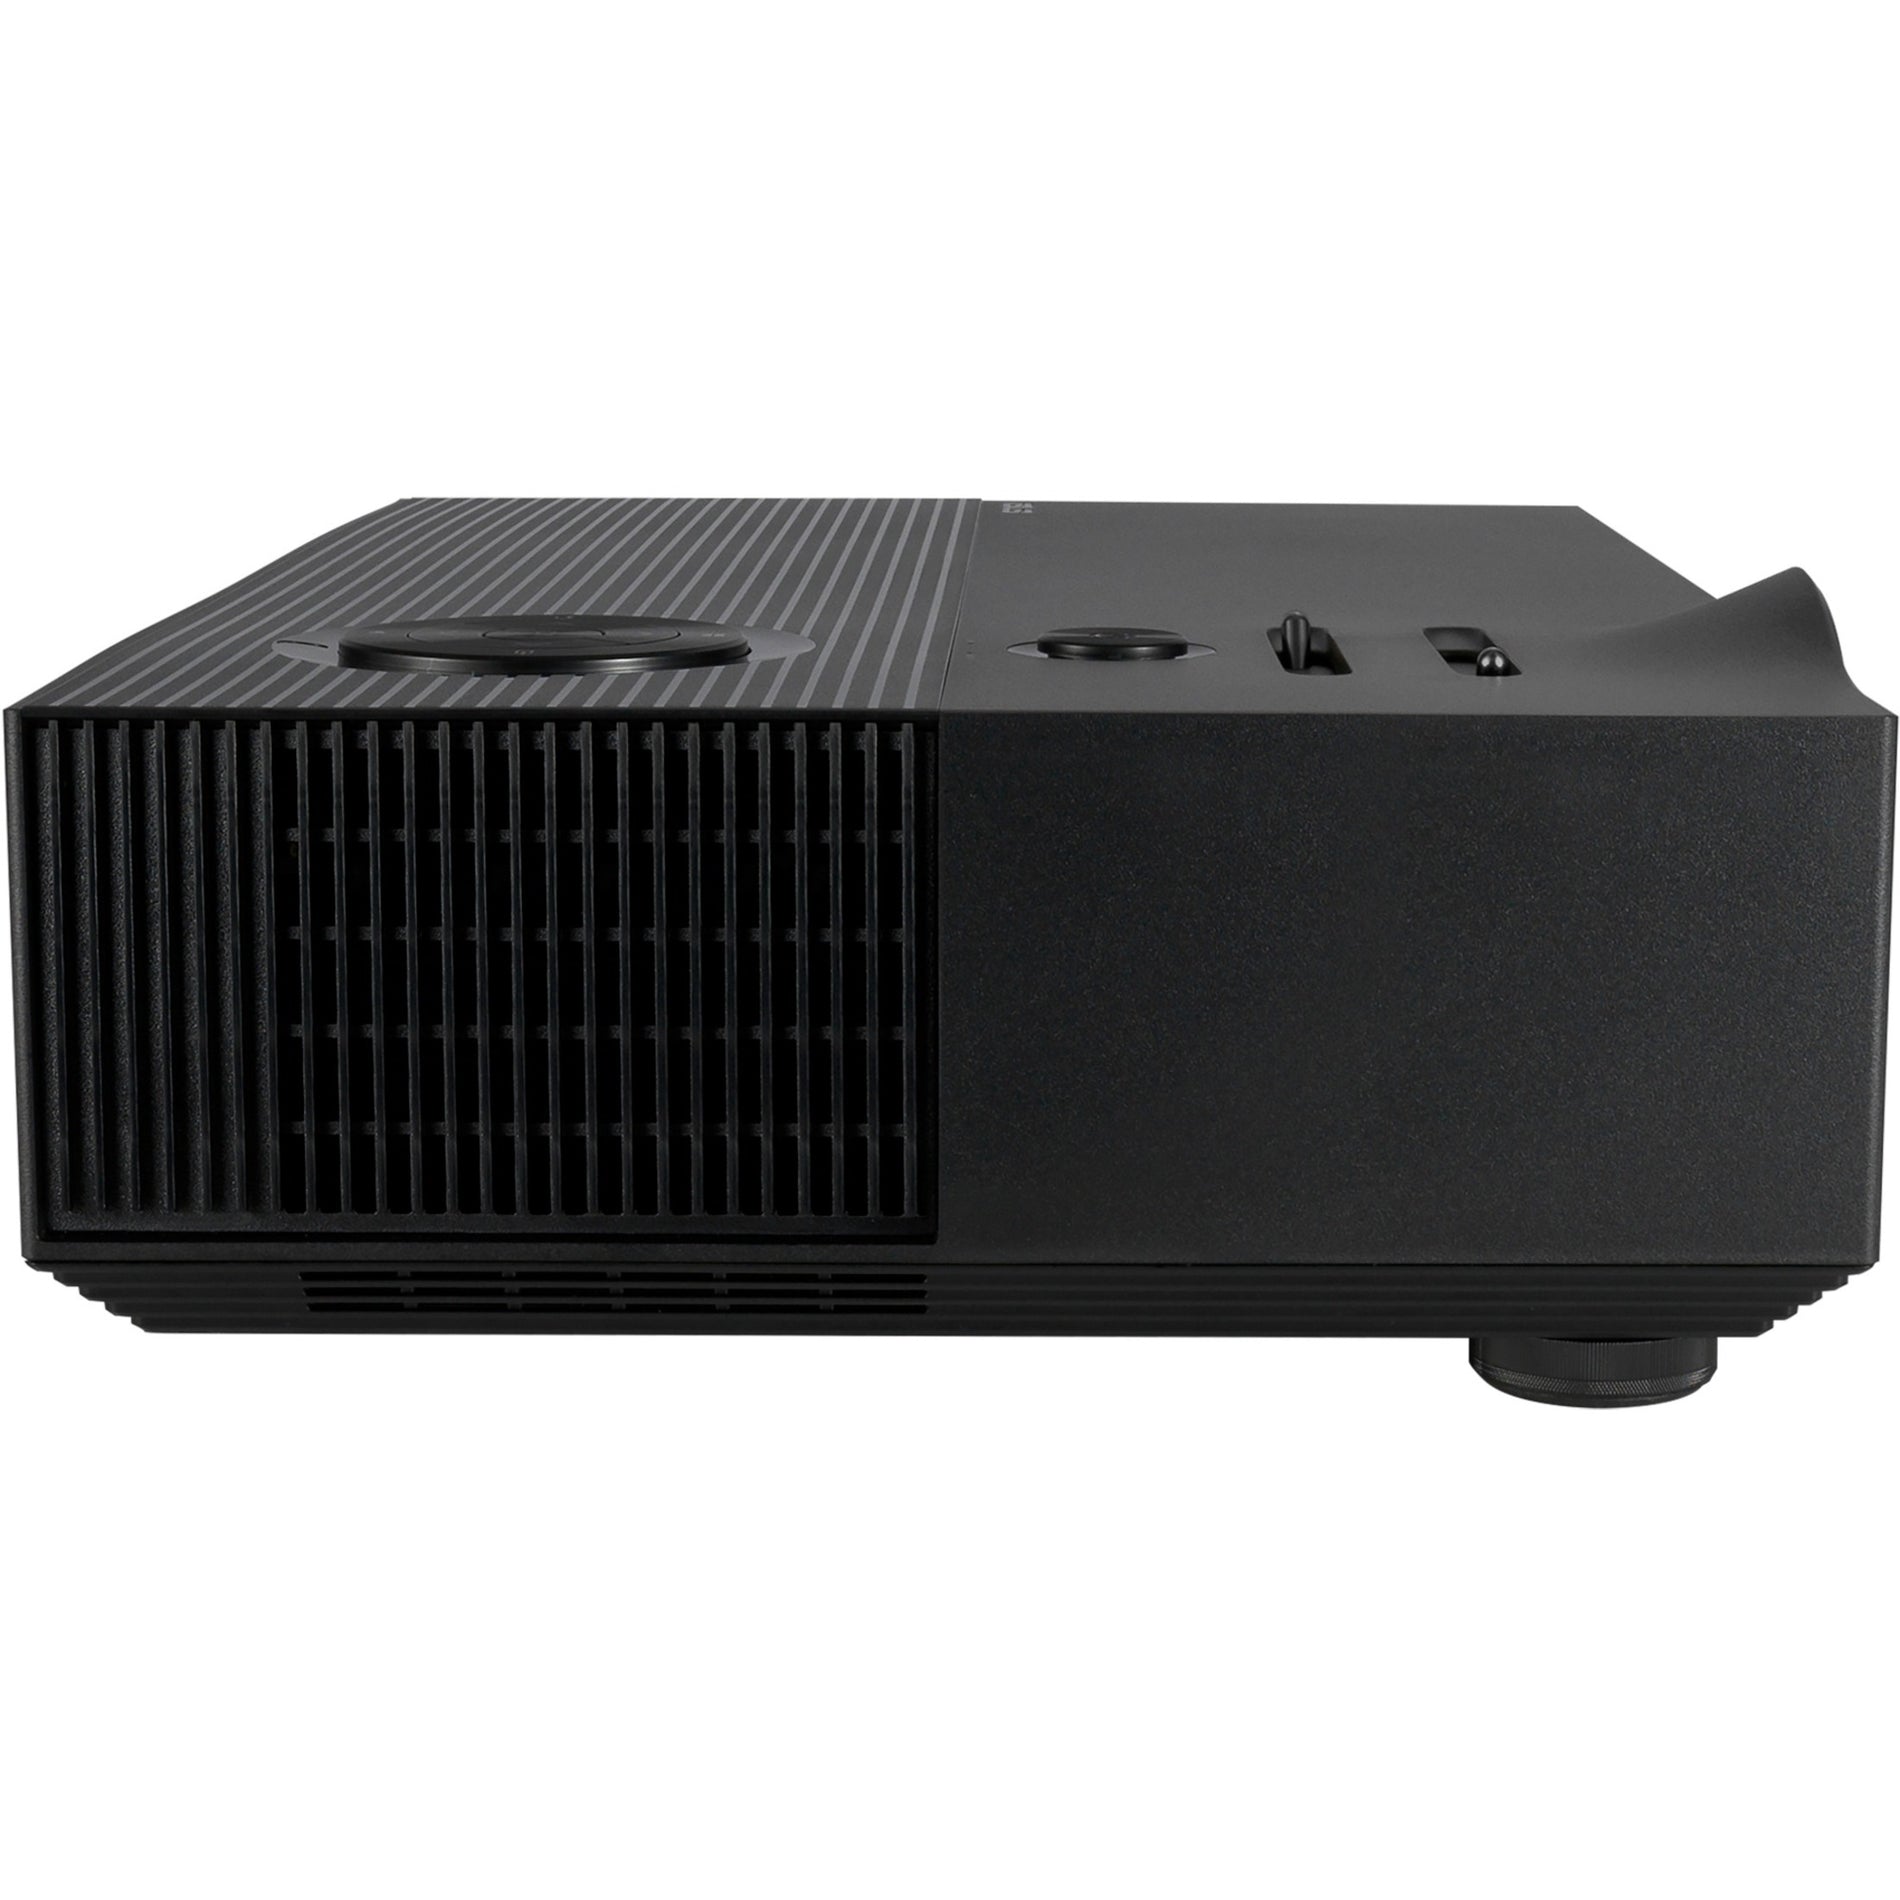 Asus H1Projector H1 DLP Projector, Full HD, 3000 lm, 16:10, 2 Year Warranty